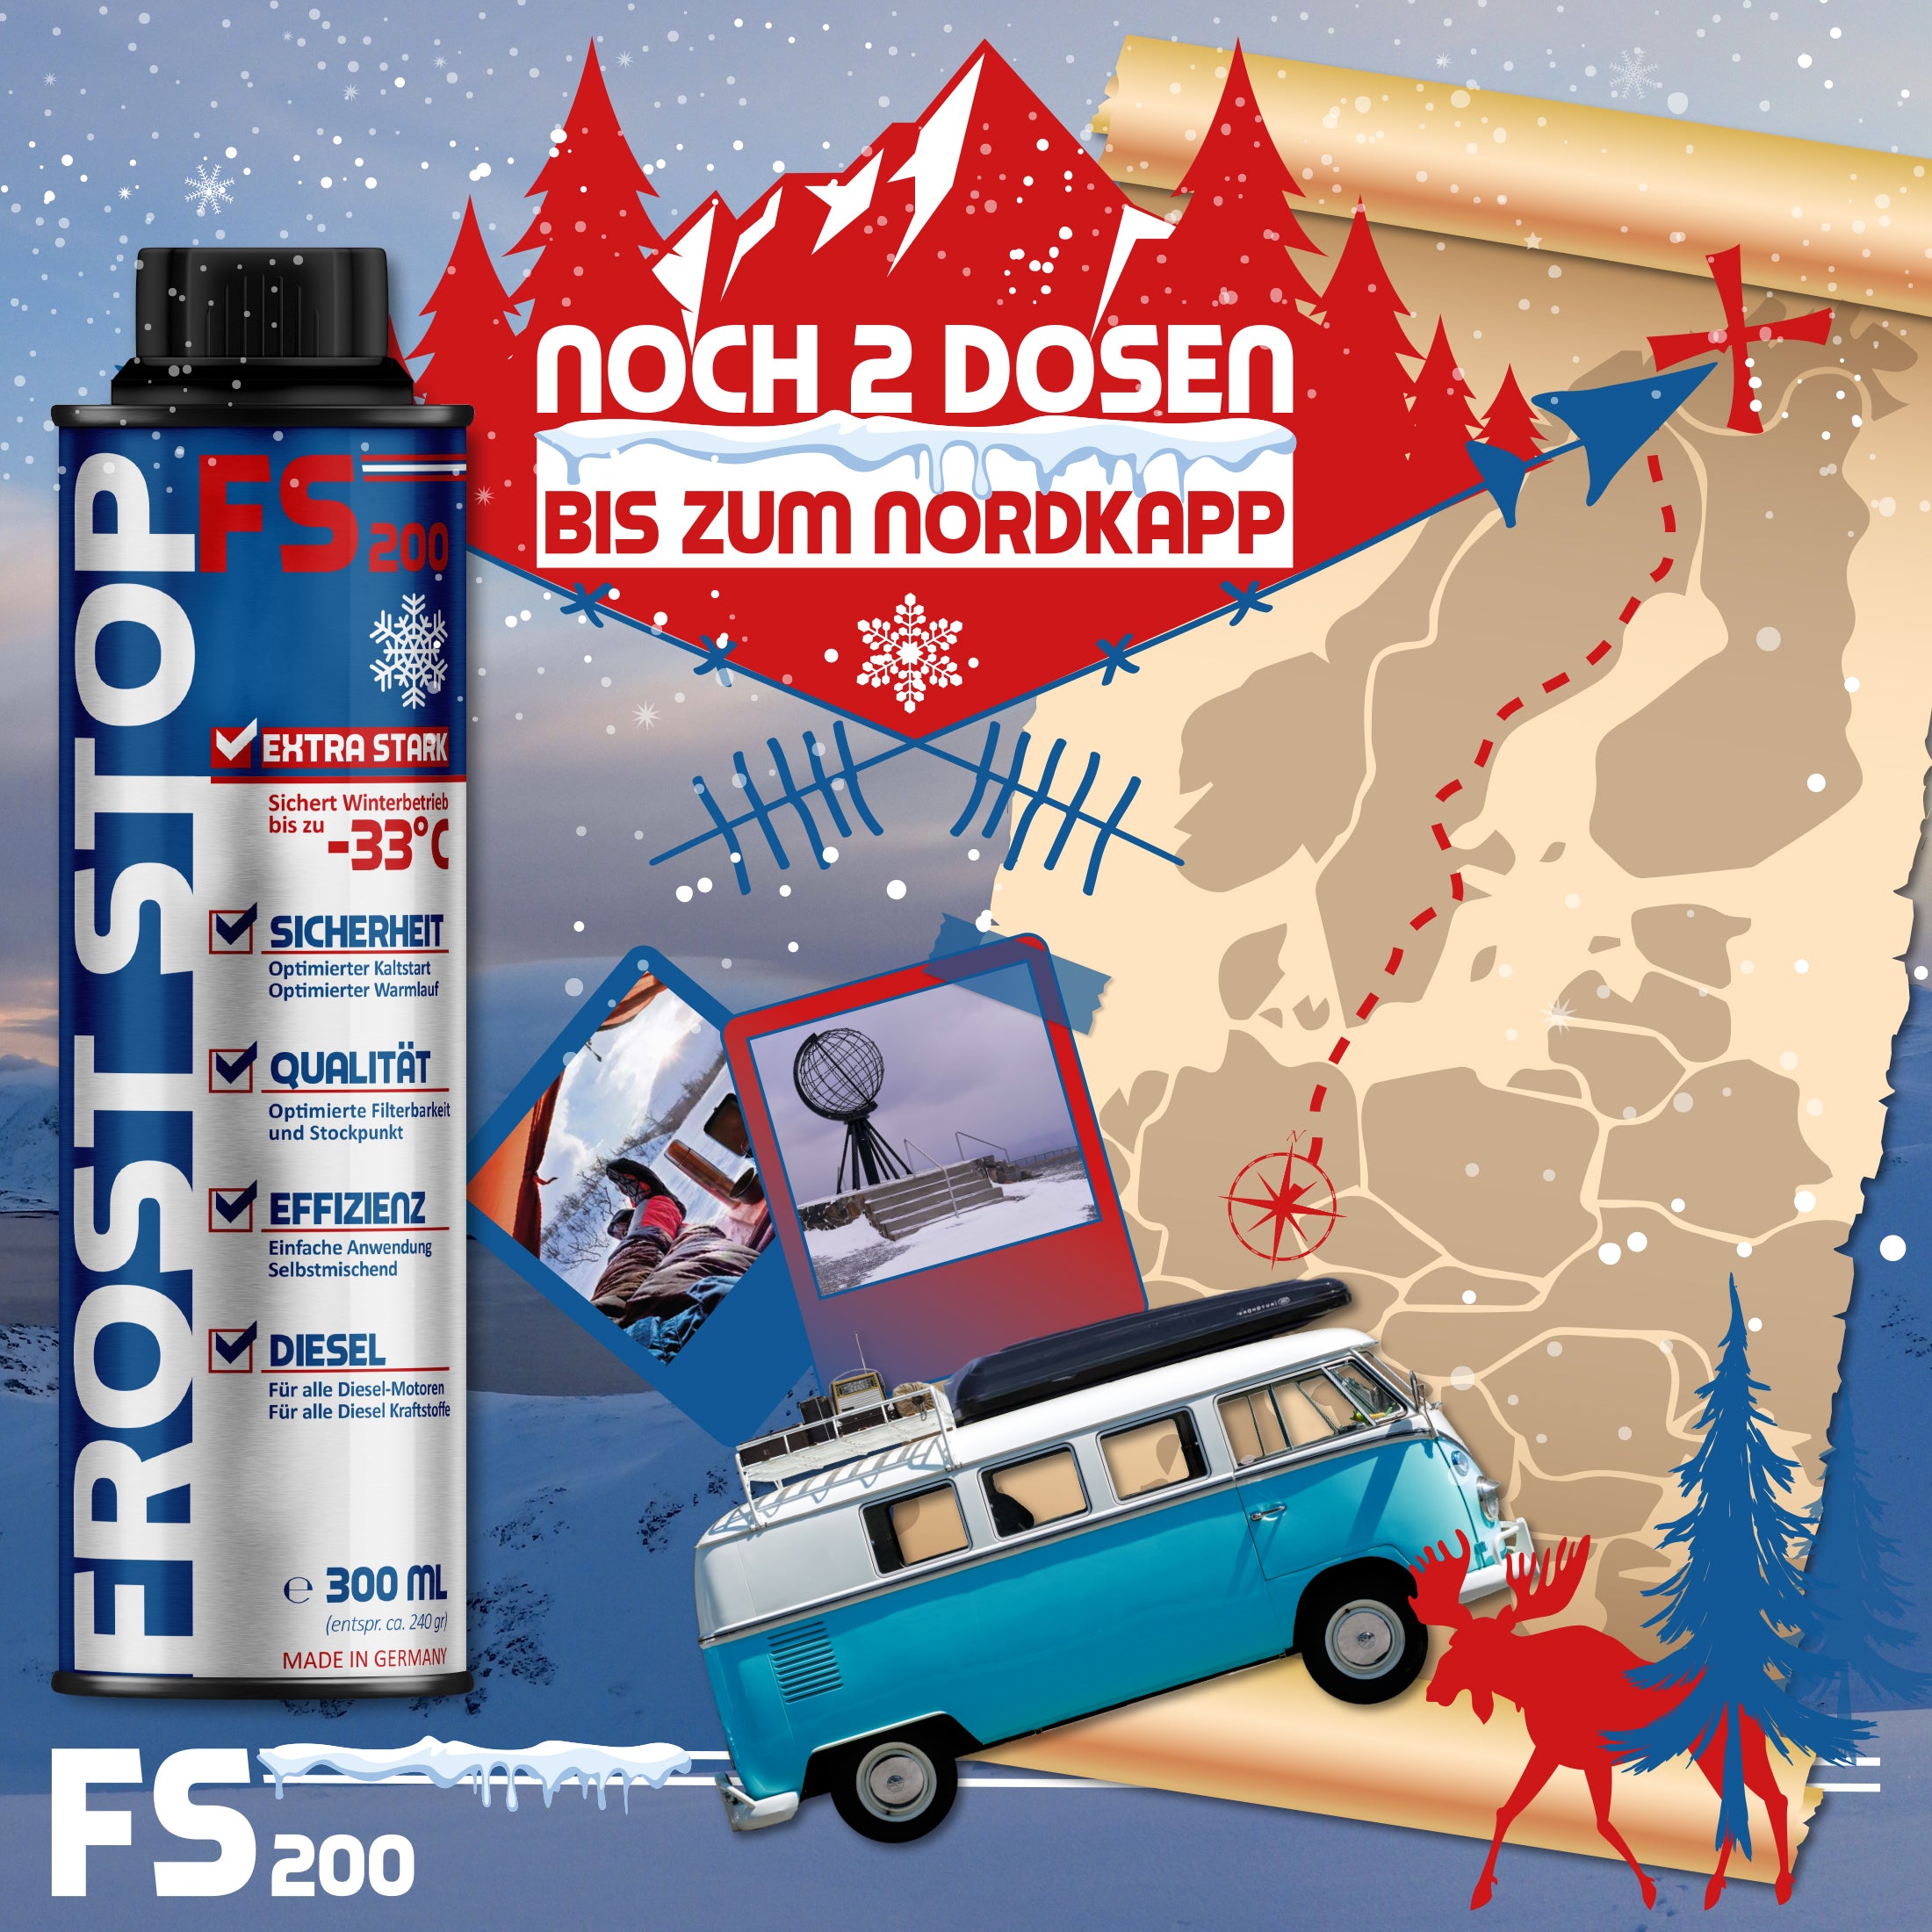 ORIGINAL SYPRIN Diesel All-Year Set - Cleaner additive and frost